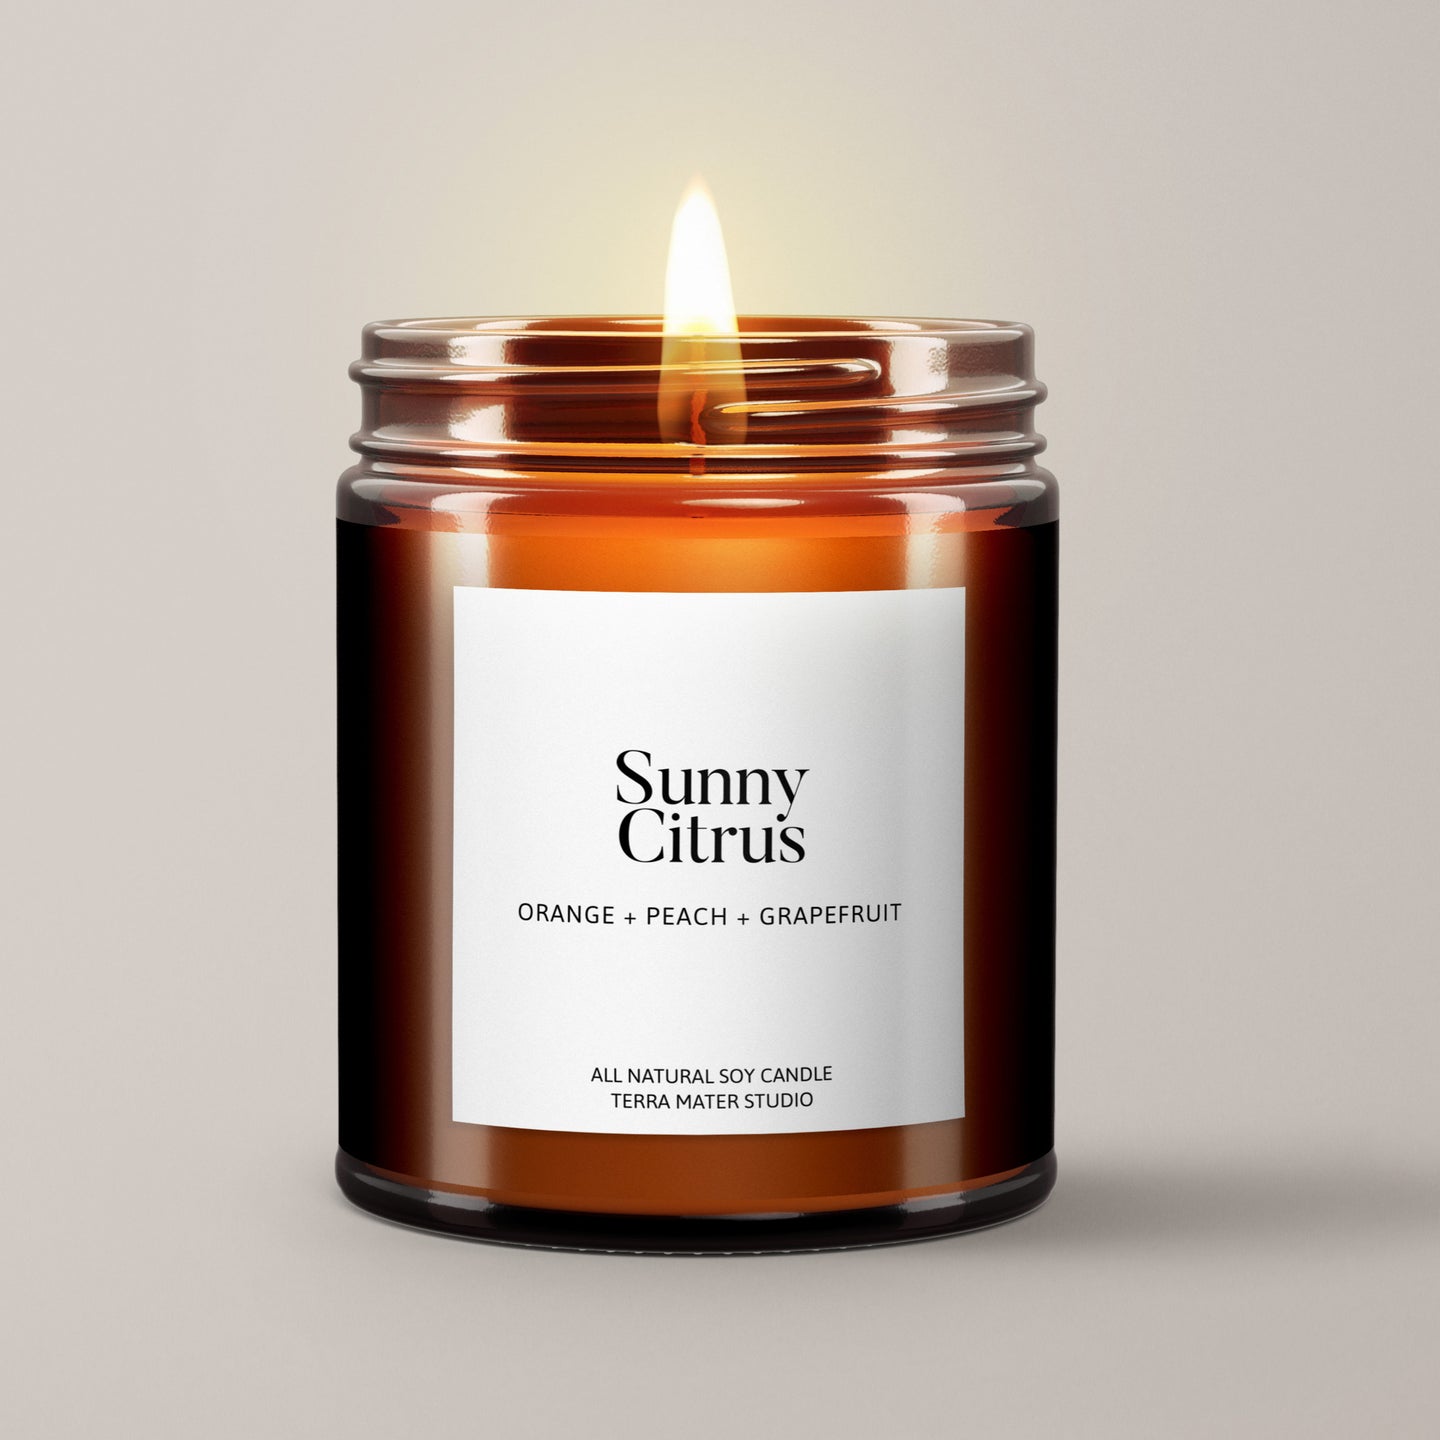 Sunny Citrus Soy Wax Candle